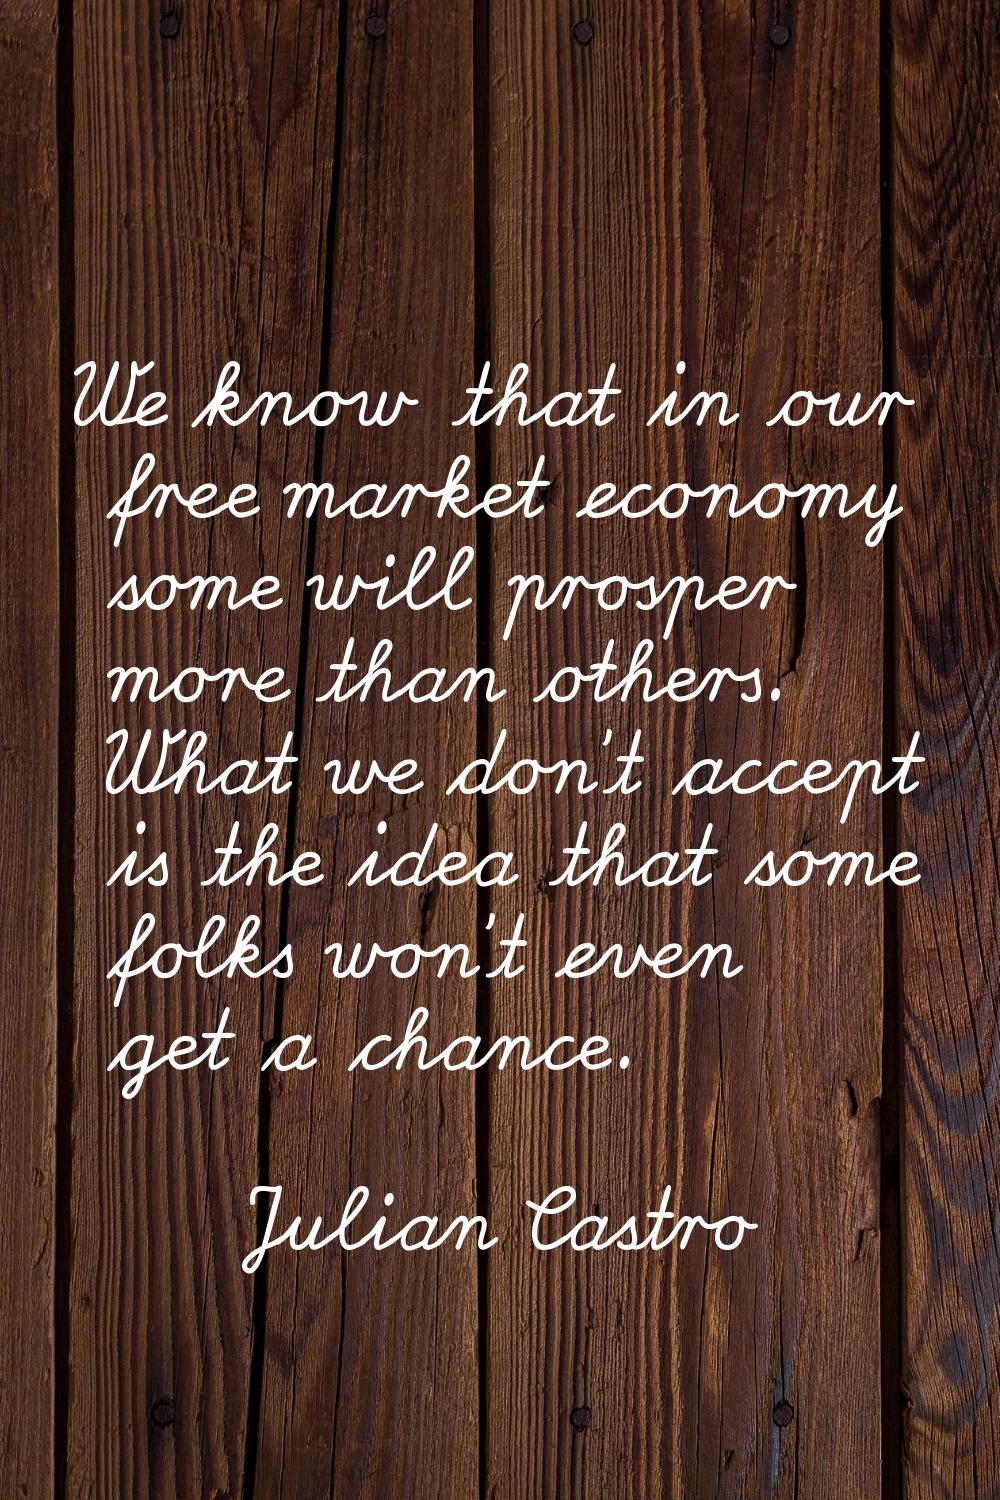 We know that in our free market economy some will prosper more than others. What we don't accept is